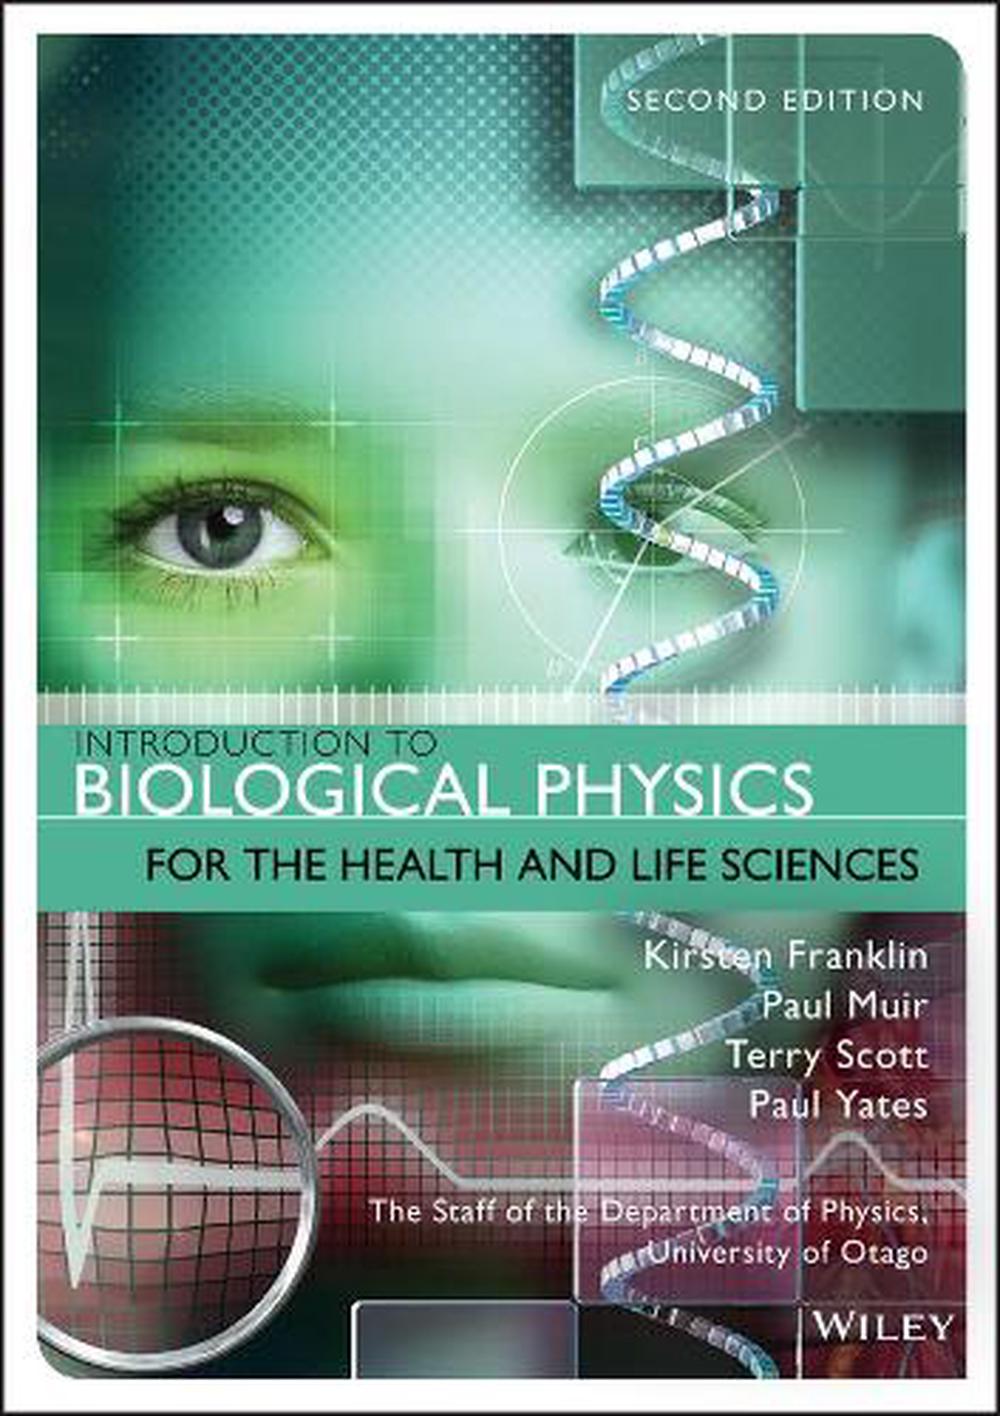 Physics for health sciences